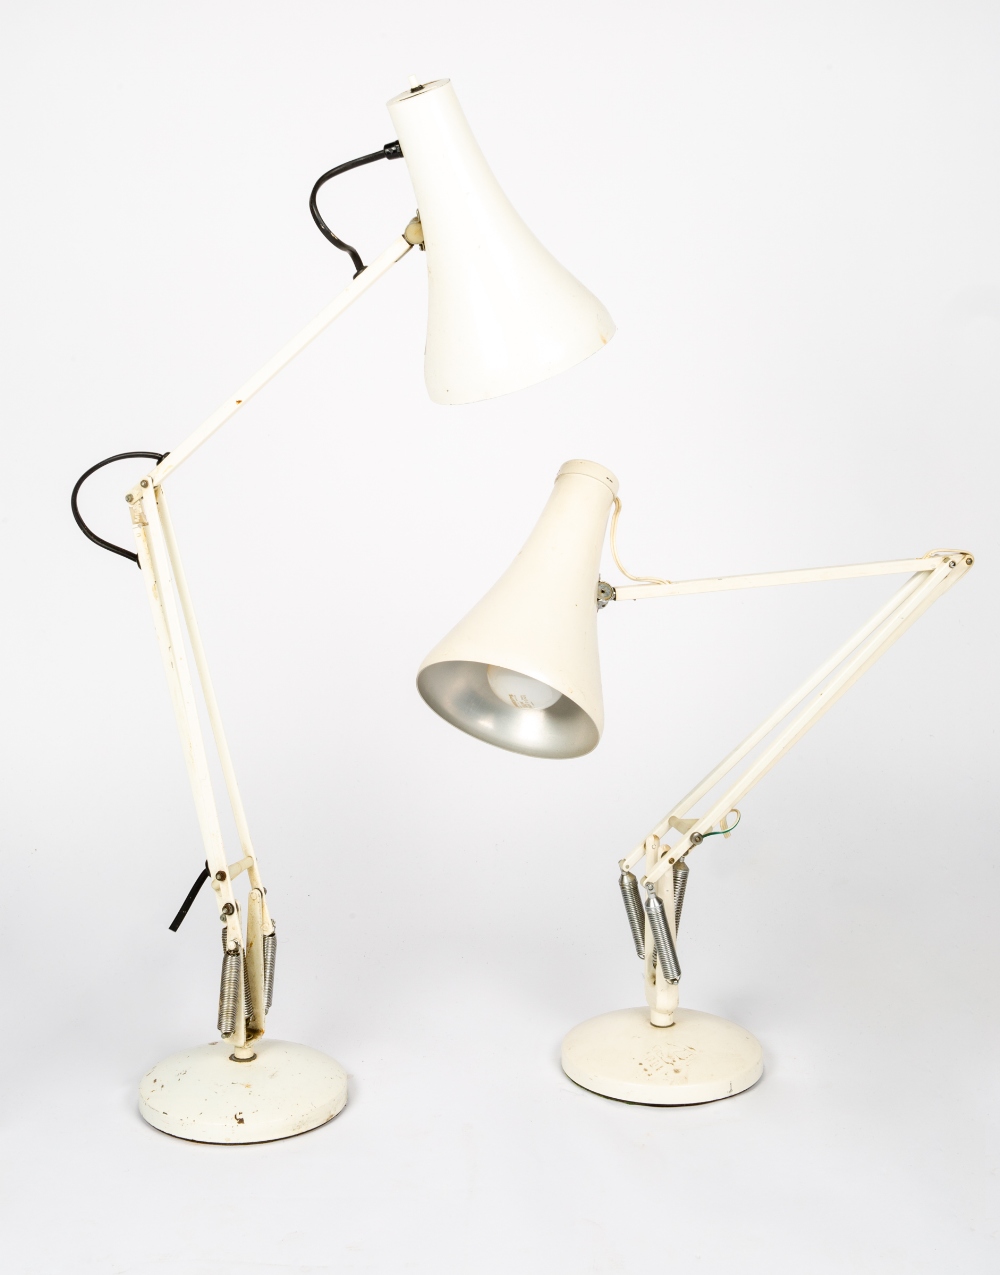 TWO 1970'S HERBERT TERRY MODEL 90 ANGLEPOISE DESK LAMPS Condition: some surface scratches and